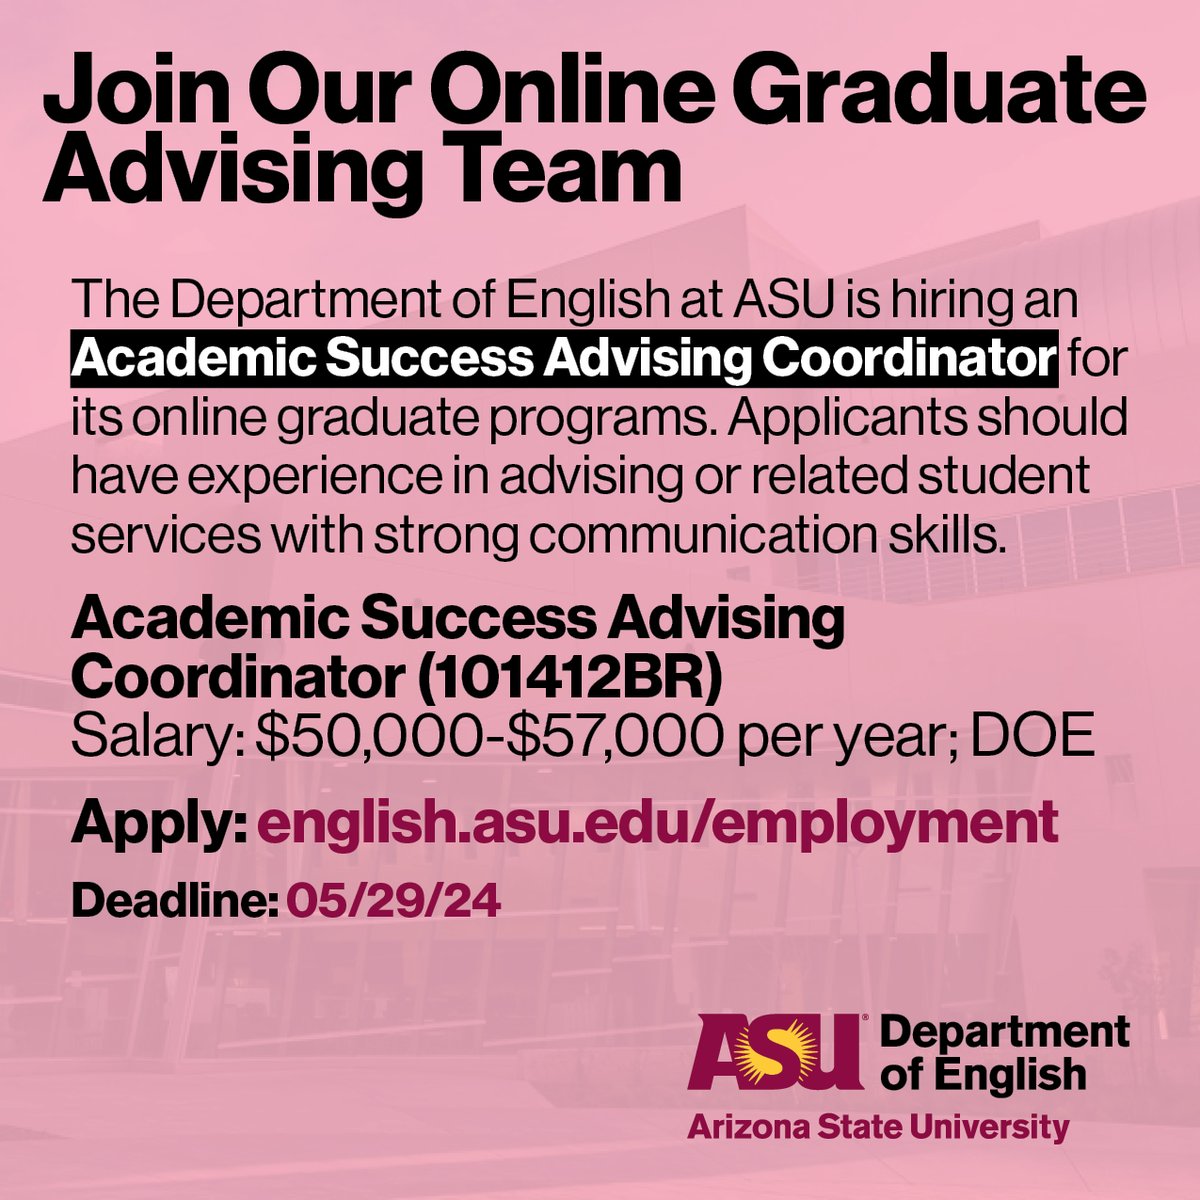 Come work with us on the beautiful Tempe campus! 🌵☀️🌴 We have an open staff position on our online graduate advising team in @ASU English. Application deadline is May 29. Info: ow.ly/lvIk50RPmyc #ASUHumanities CC: @asuonline